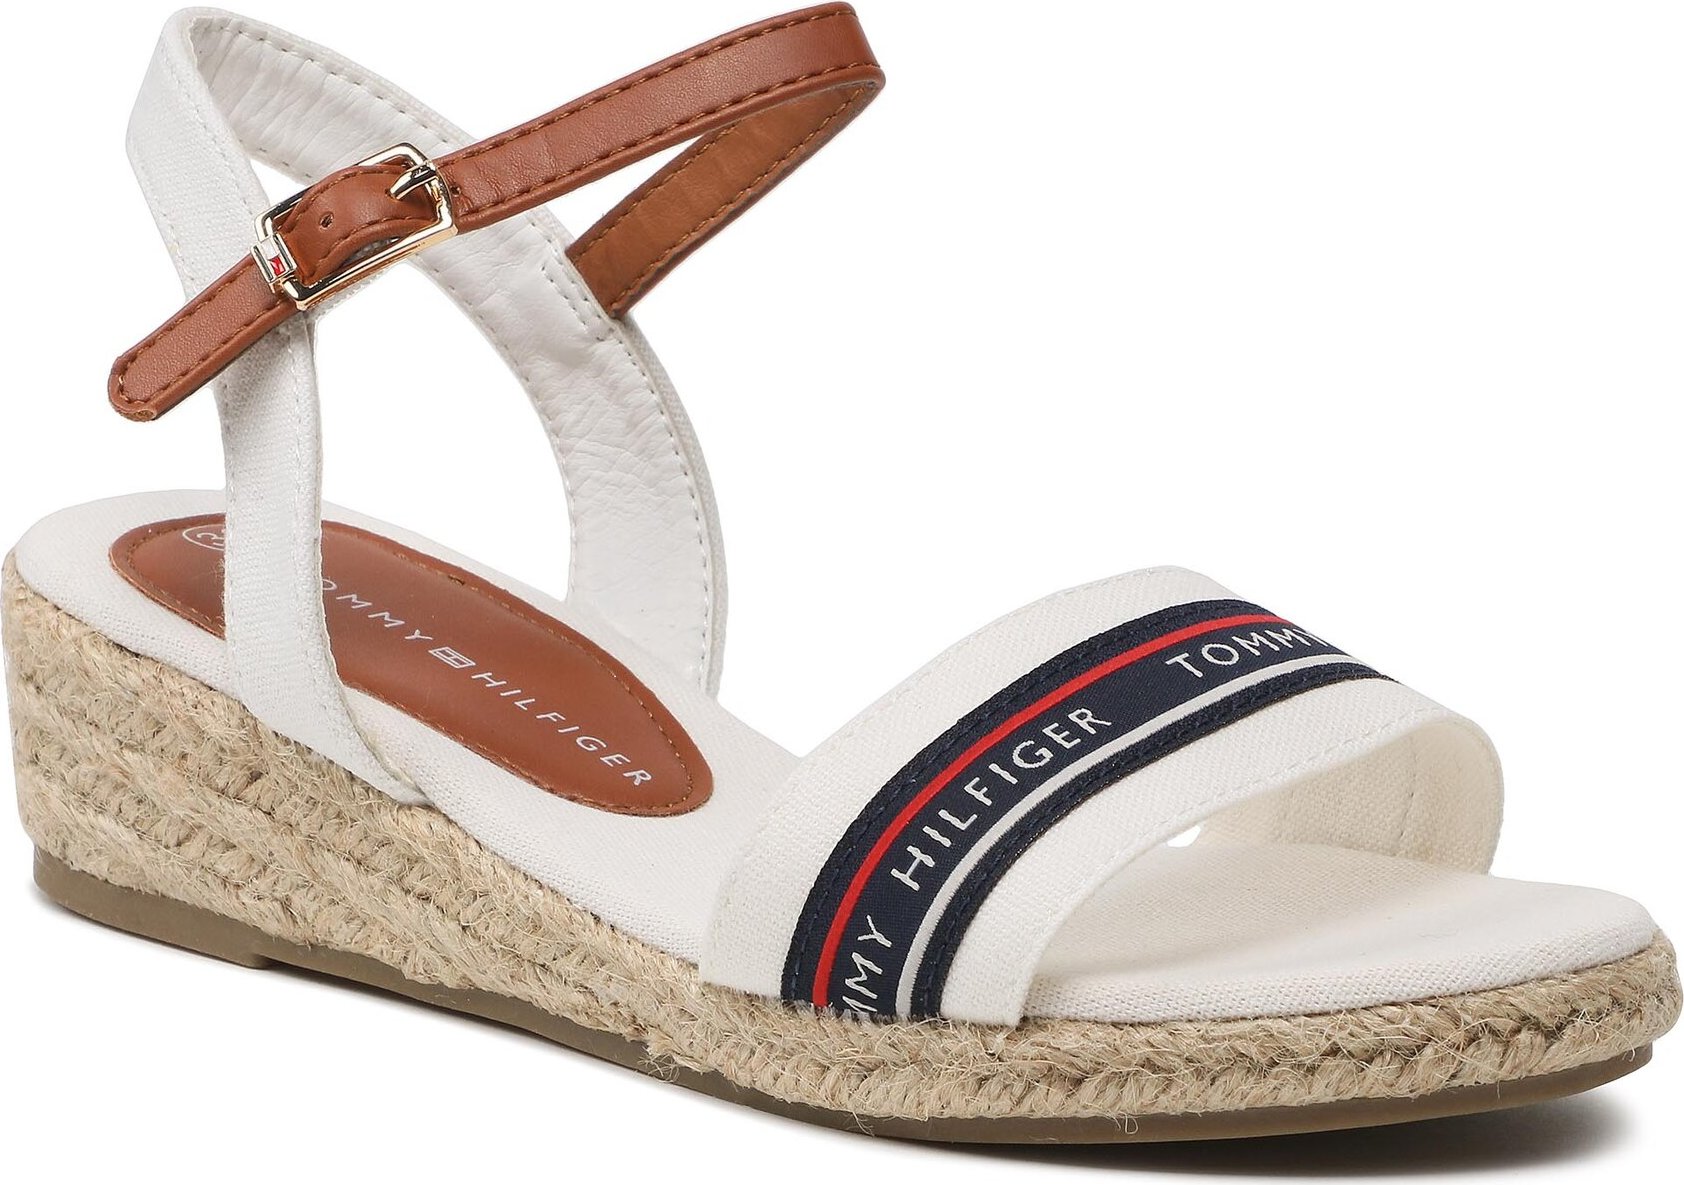 Espadrilky Tommy Hilfiger Rope Wedge T3A7-32777-0048X100 M White/Tobacco X100